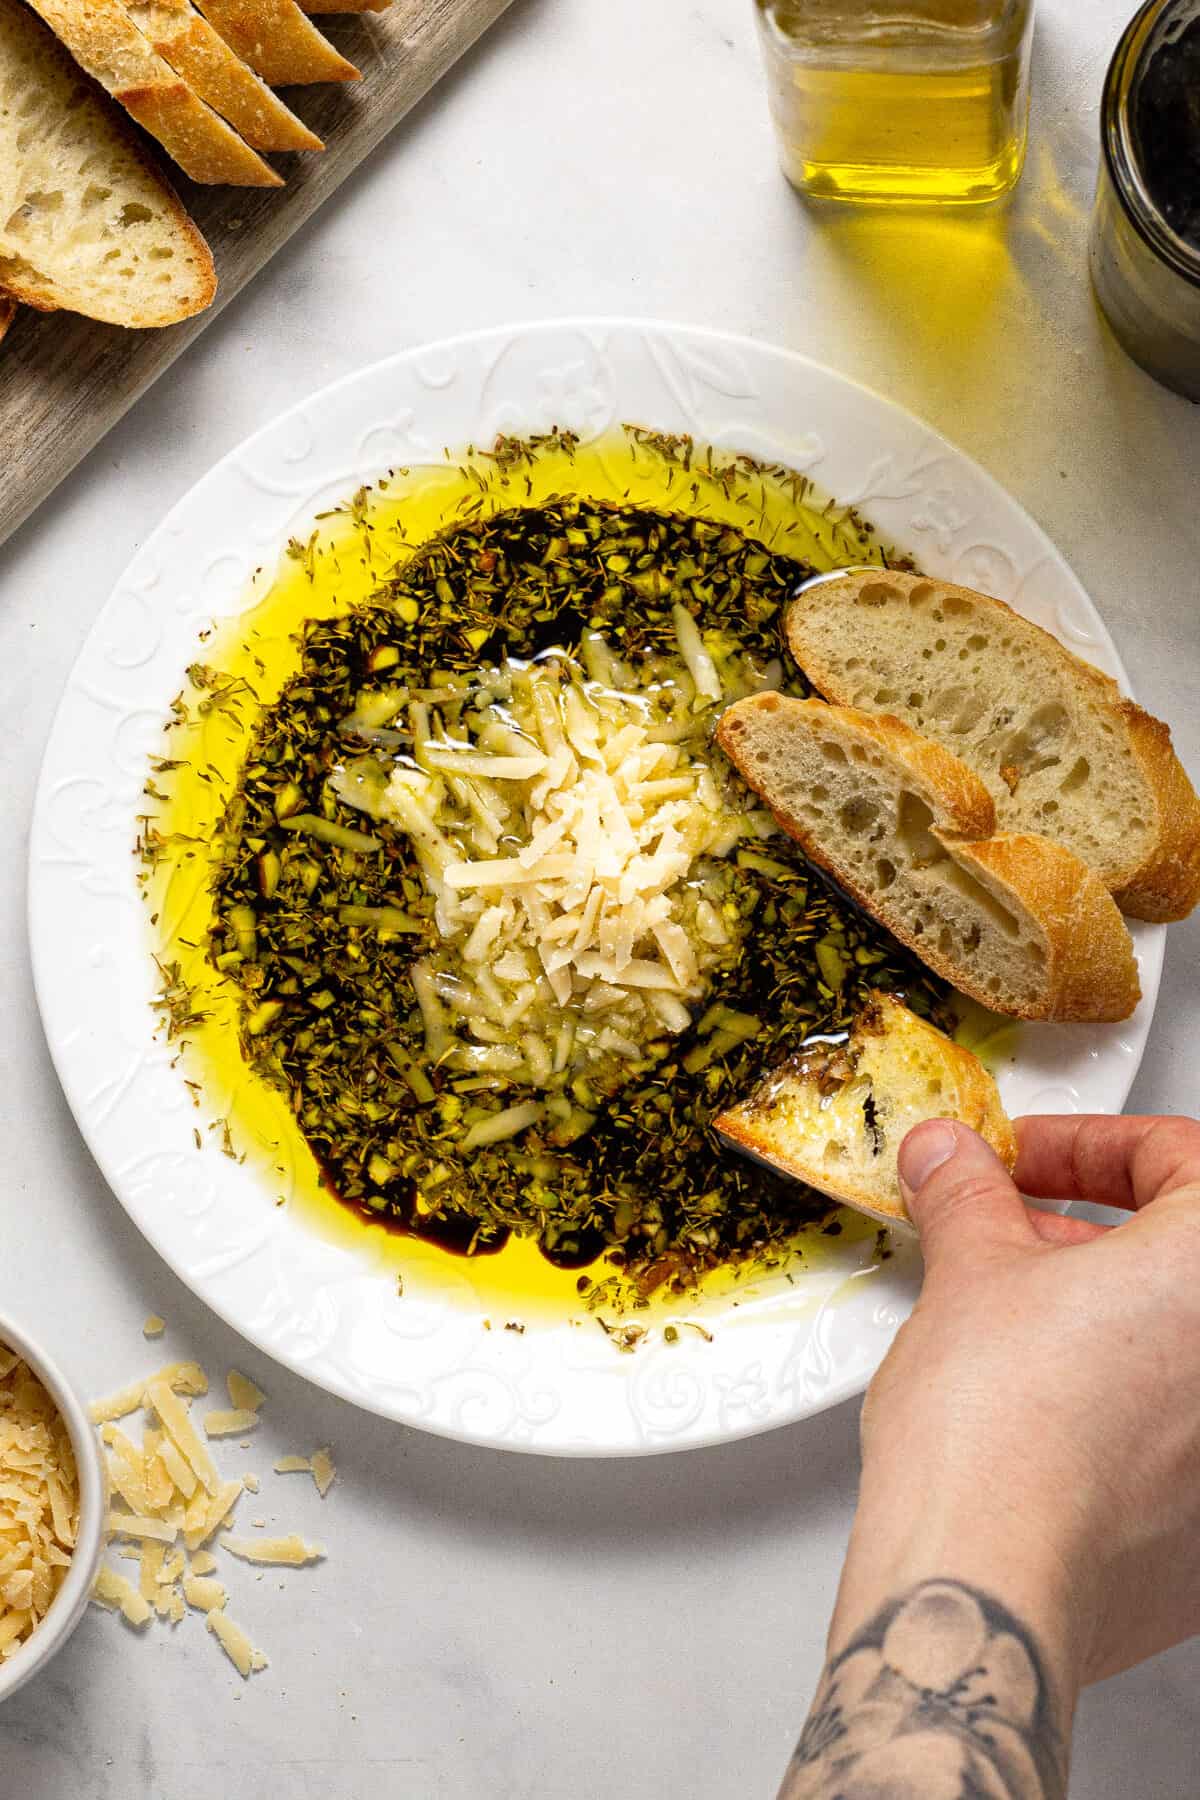 Overhead shot of a plate filled with olive oil and balsamic vinegar dip with Parmesan cheese and herbs